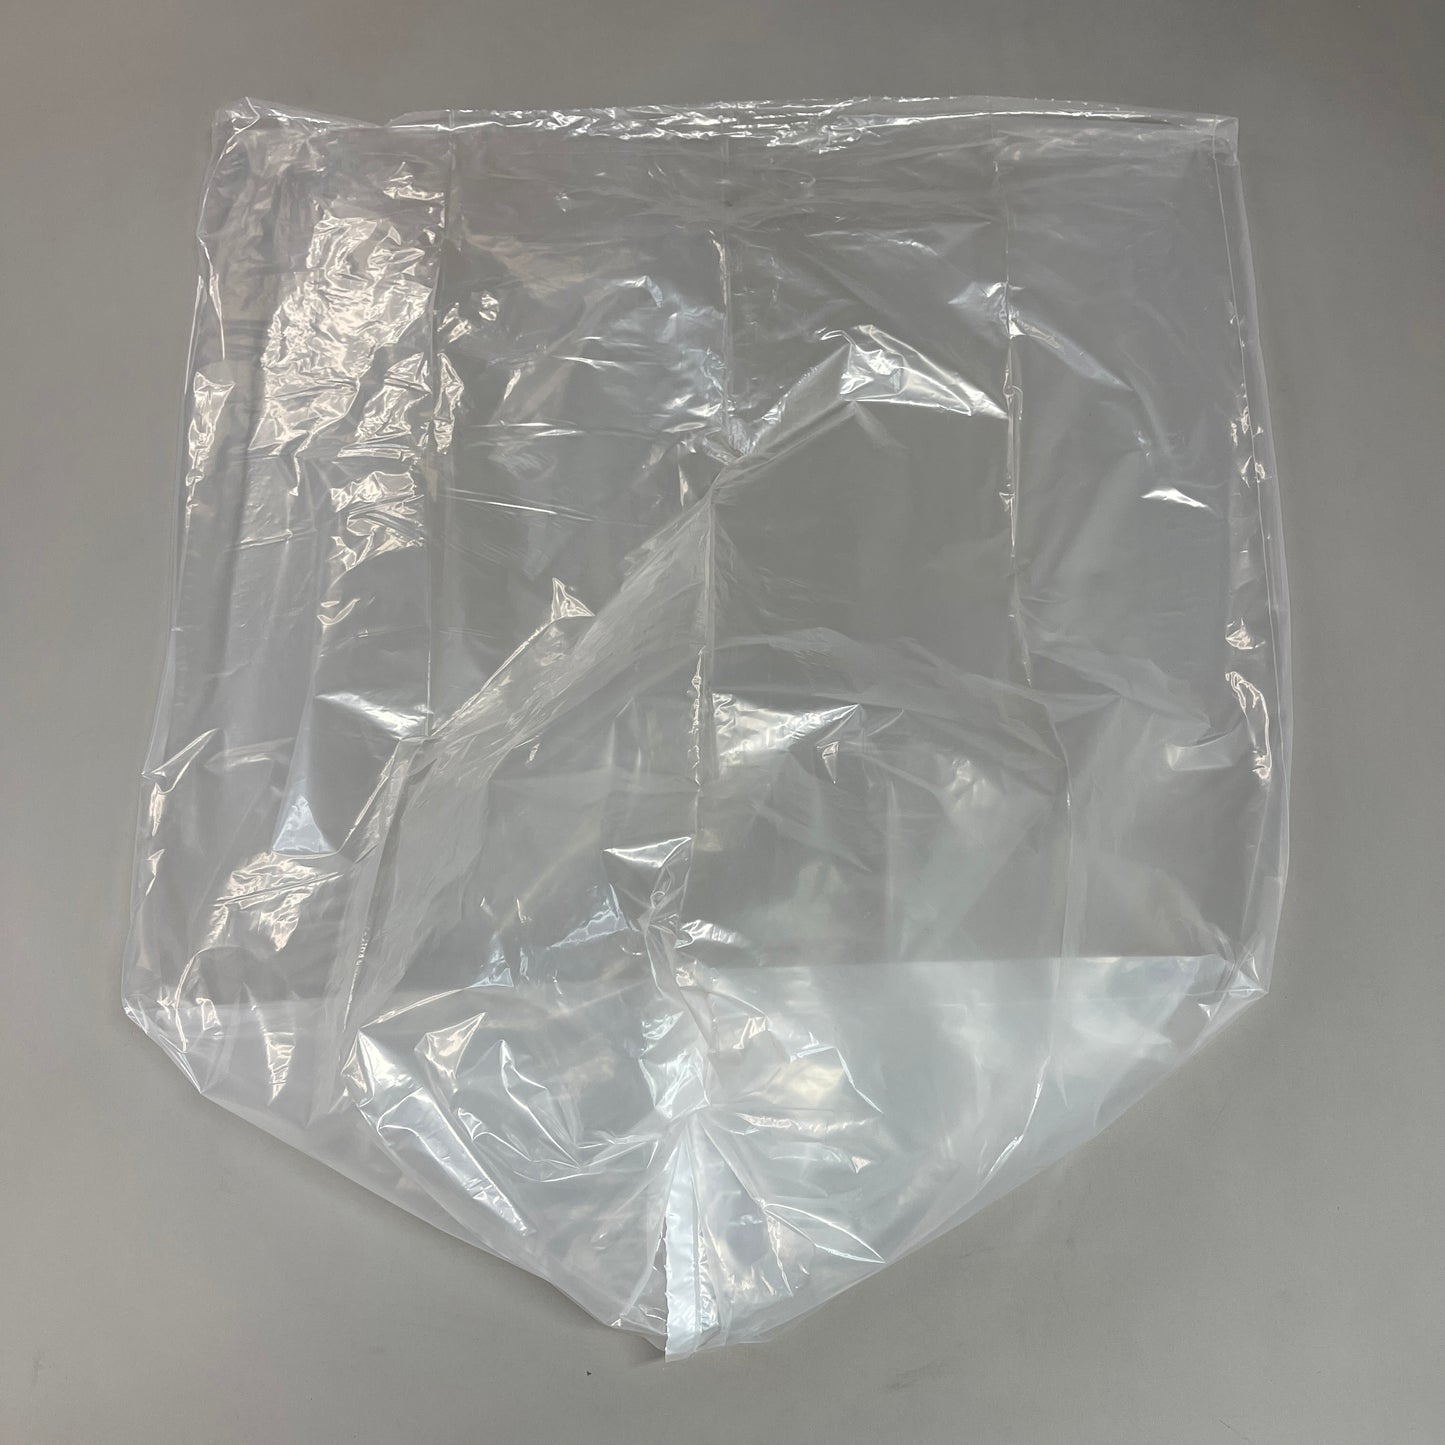 TOUGH GUY Recycled Plastic Trash Bags 24" W x 32" H (12 to 16 gal) Clear 500 count (New)